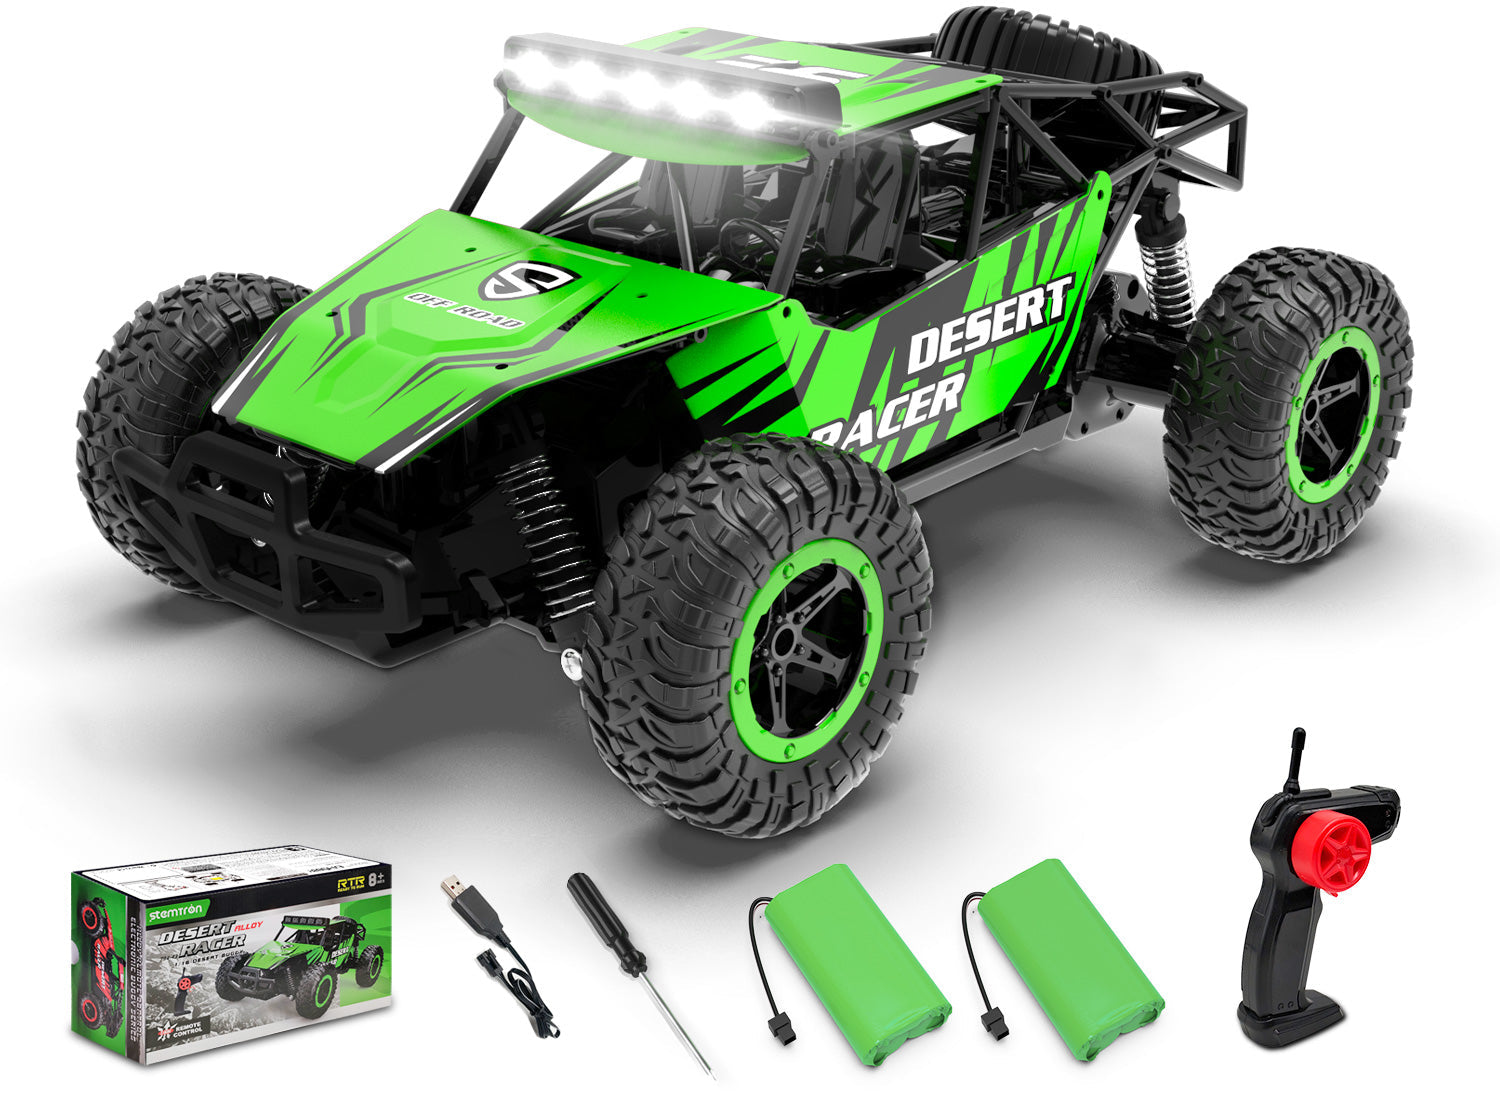 EXHOBBY 1/16 All Terrain Remote Control Car for Kids Off Road RC Truck Desert Racer Great Gift 2 pcs Batteries